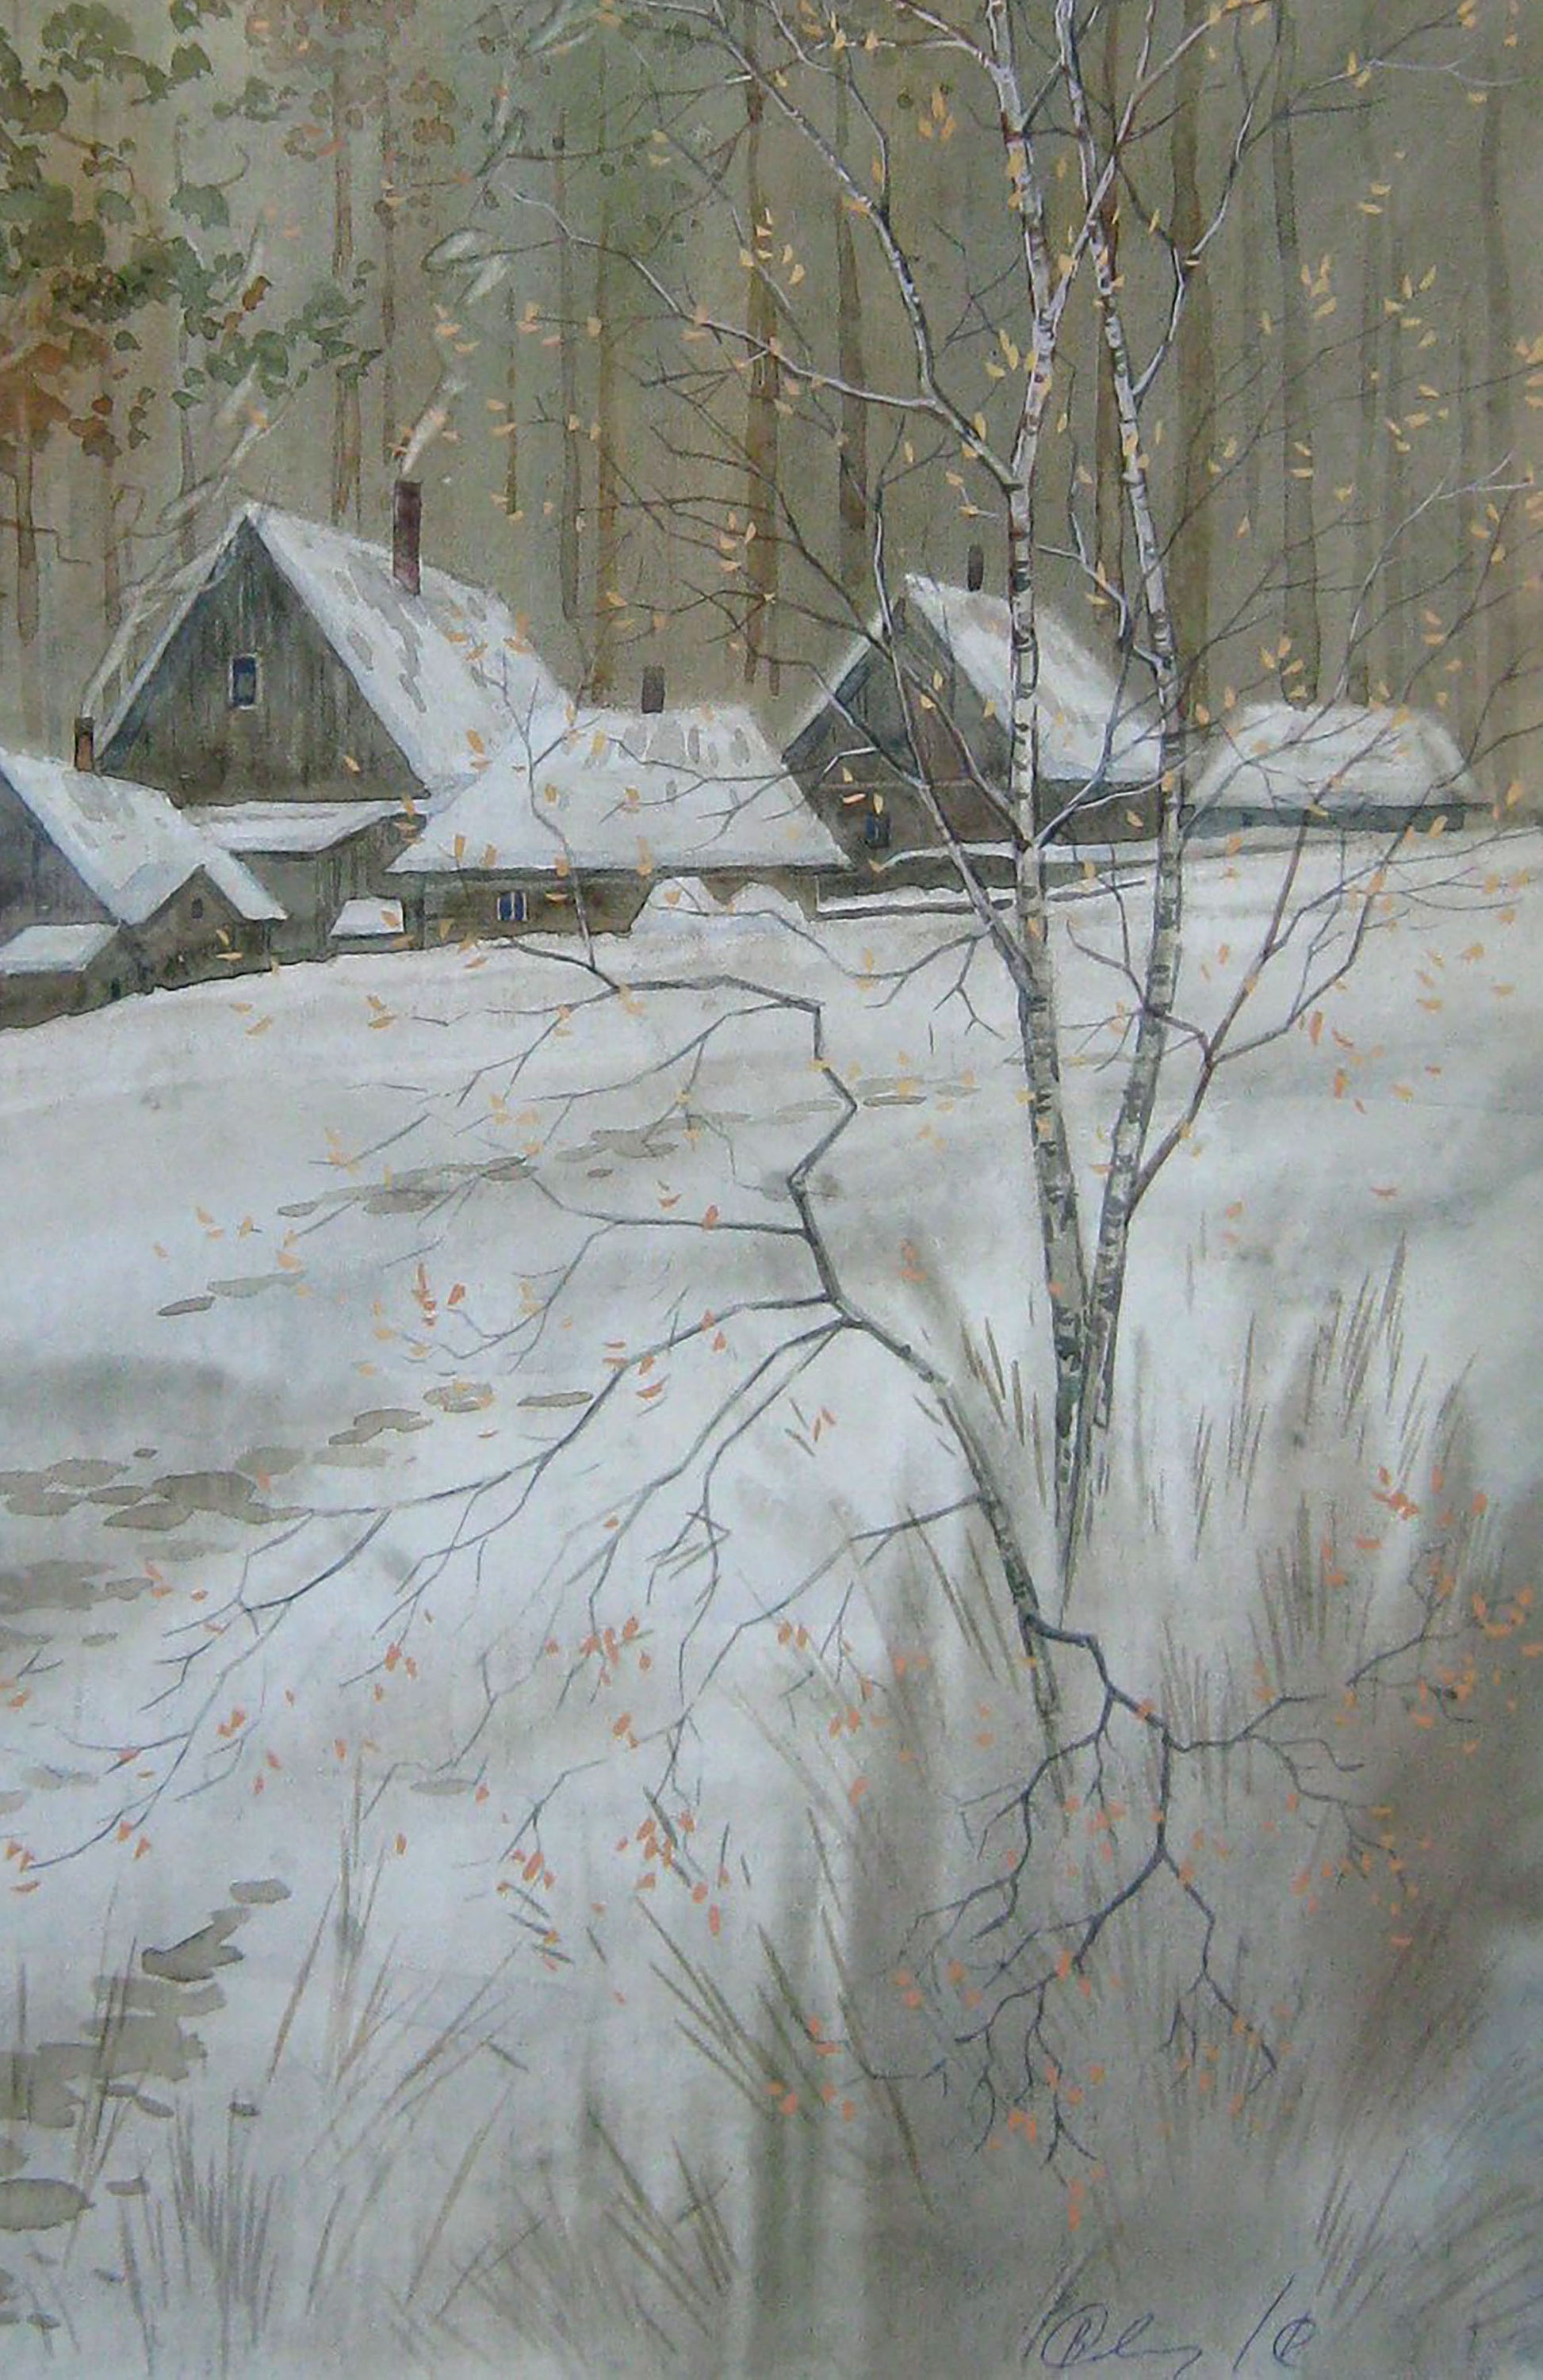 Cold February, depicted in watercolor by Valery Savenets